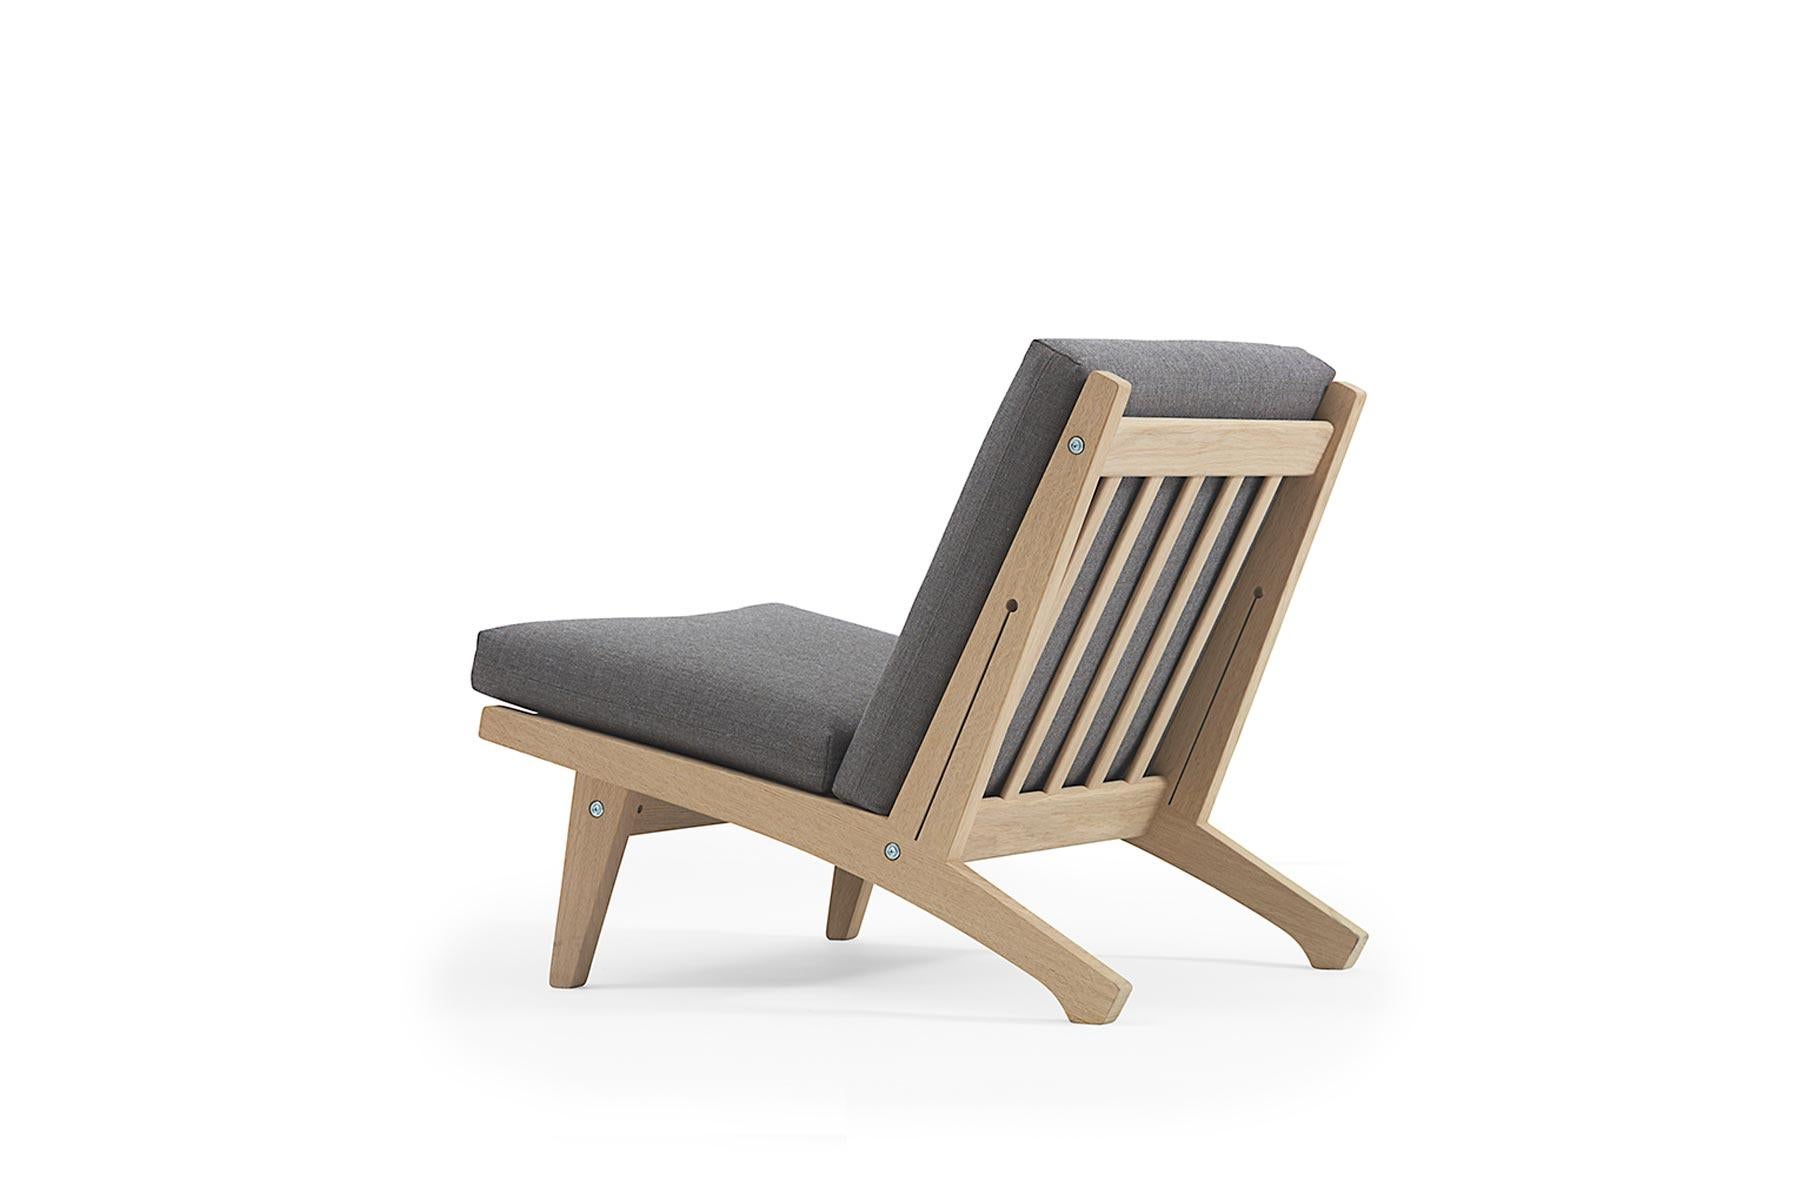 Designed in 1969 by Hans Wegner, the 370 lounge chair pairs clean lines with remarkable craftsmanship. The chair is hand crafted at Getama’s factory in Gedsted, Denmark by skilled cabinetmakers using traditional Scandinavian techniques.

Available